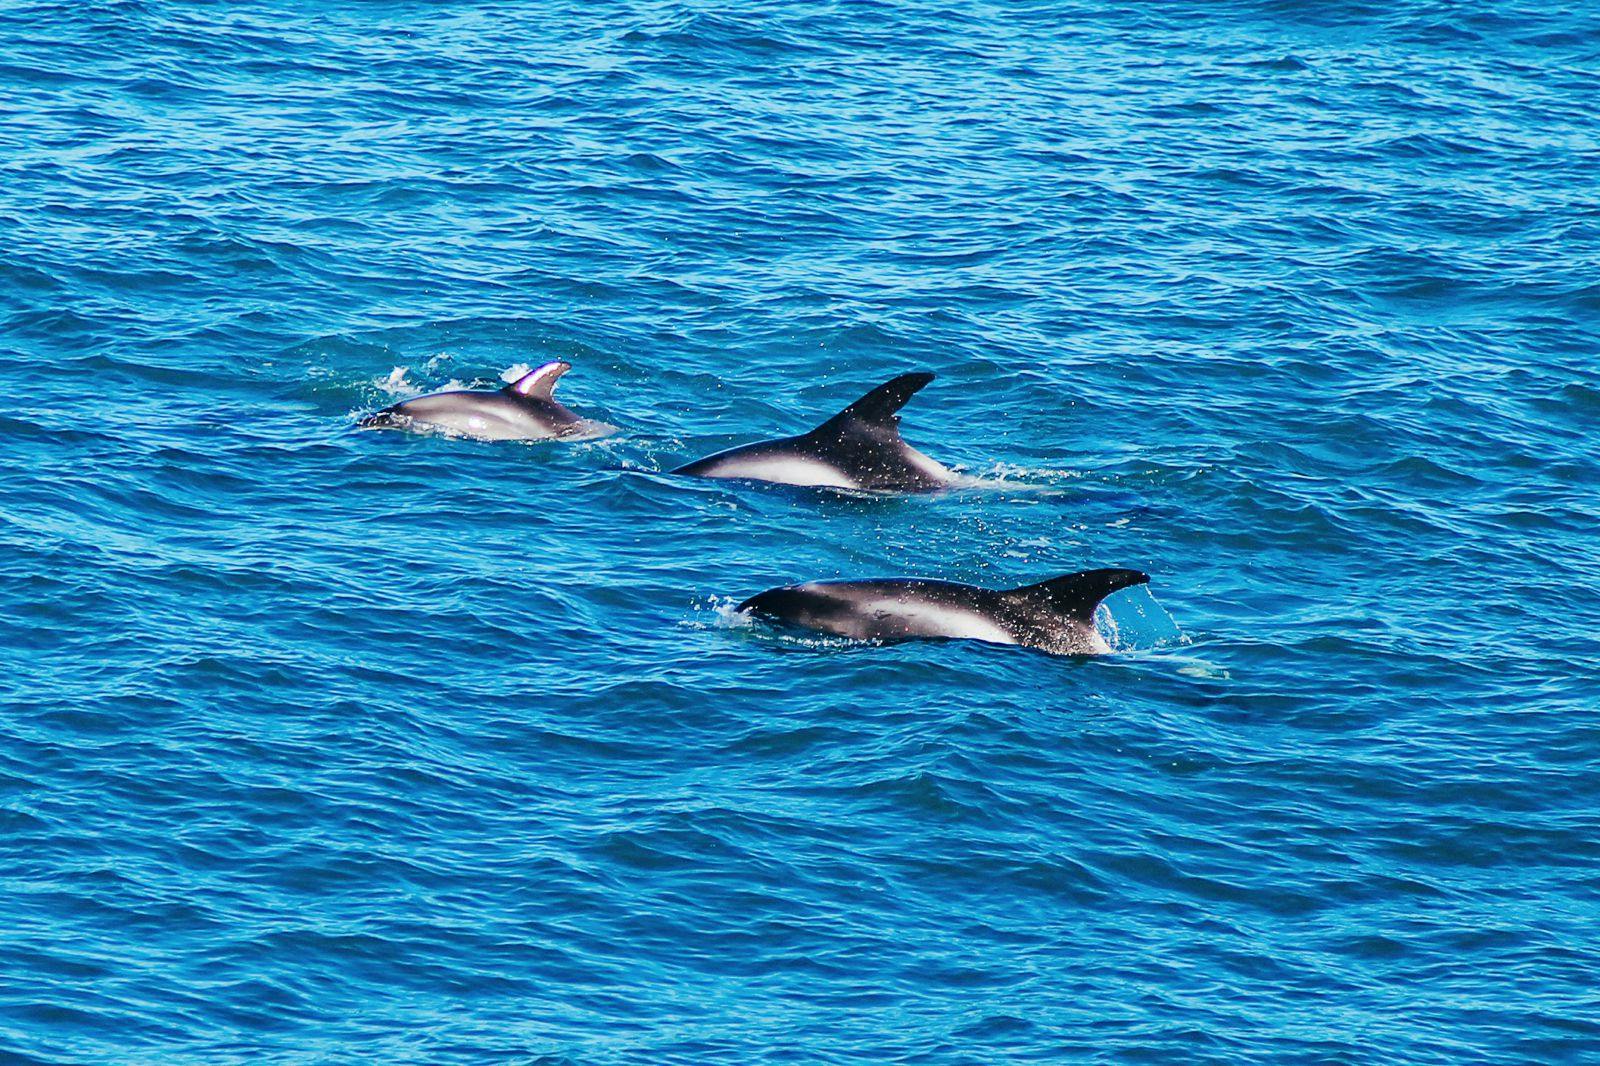 Image - Can I Expect to See Dolphins on a Whale-Watching Tour?